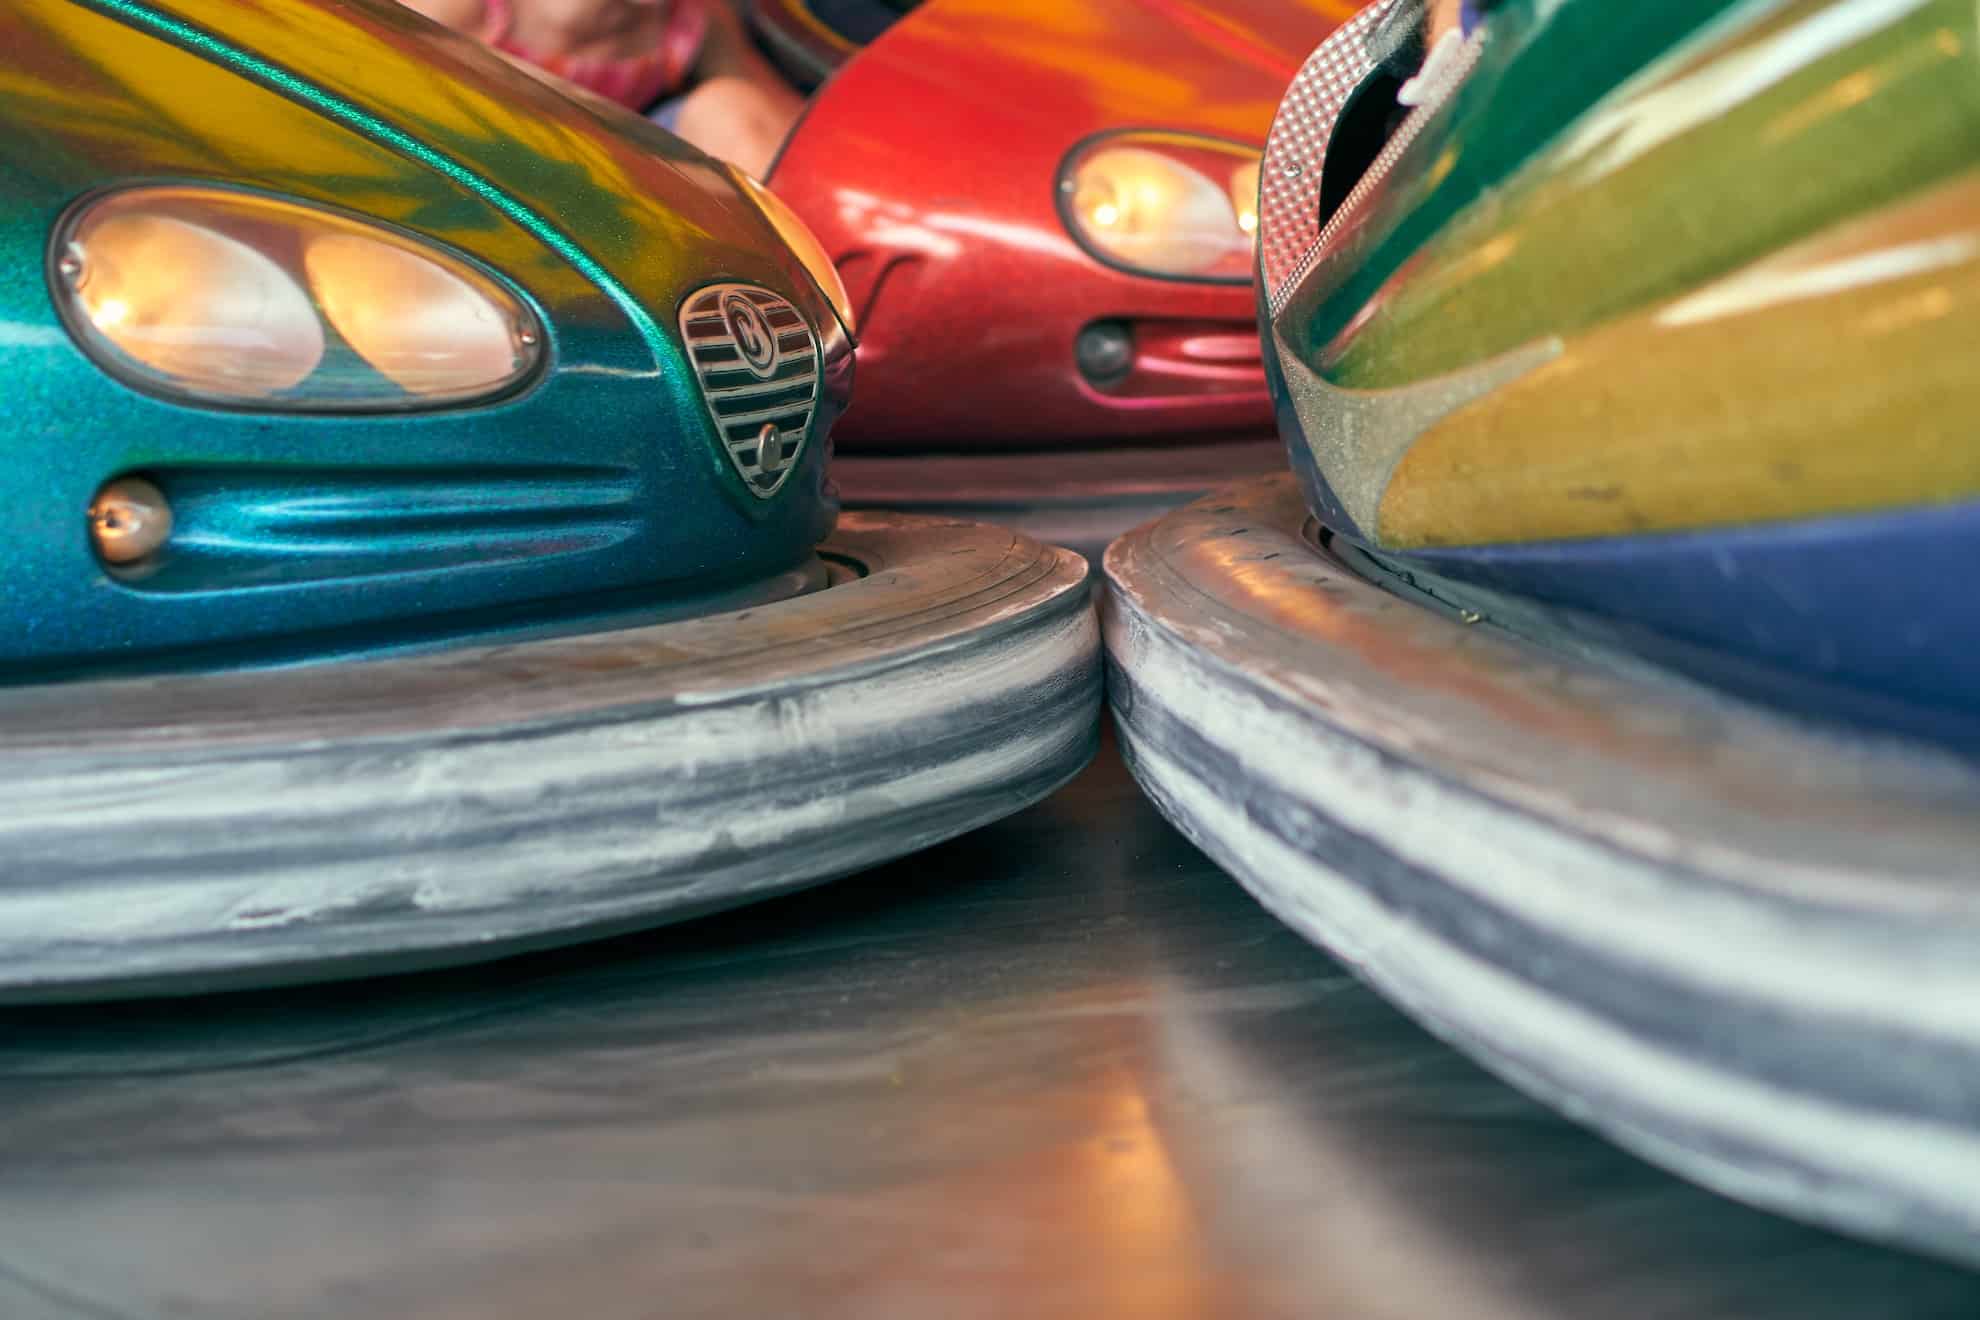 Photo of bumper cars by Markus Distelrath from Pixabay